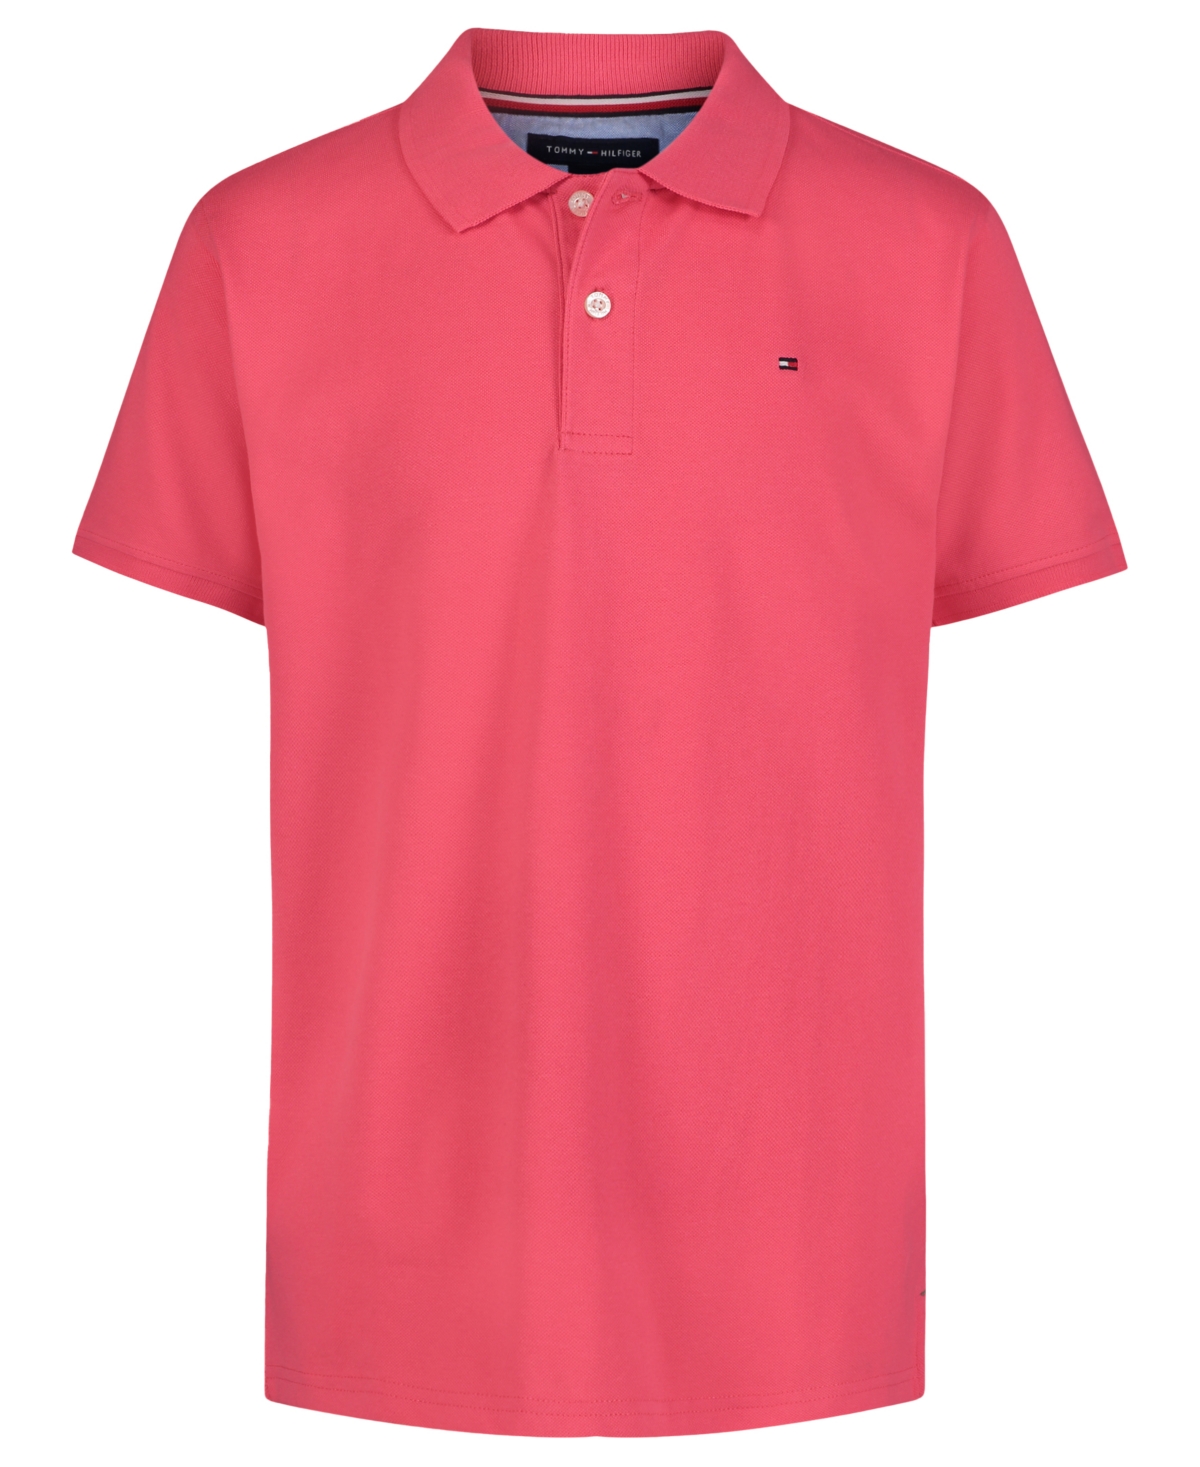 Tommy Hilfiger Kids' Toddler Boys Strech Ivy Polo Shirt In Pink Punch